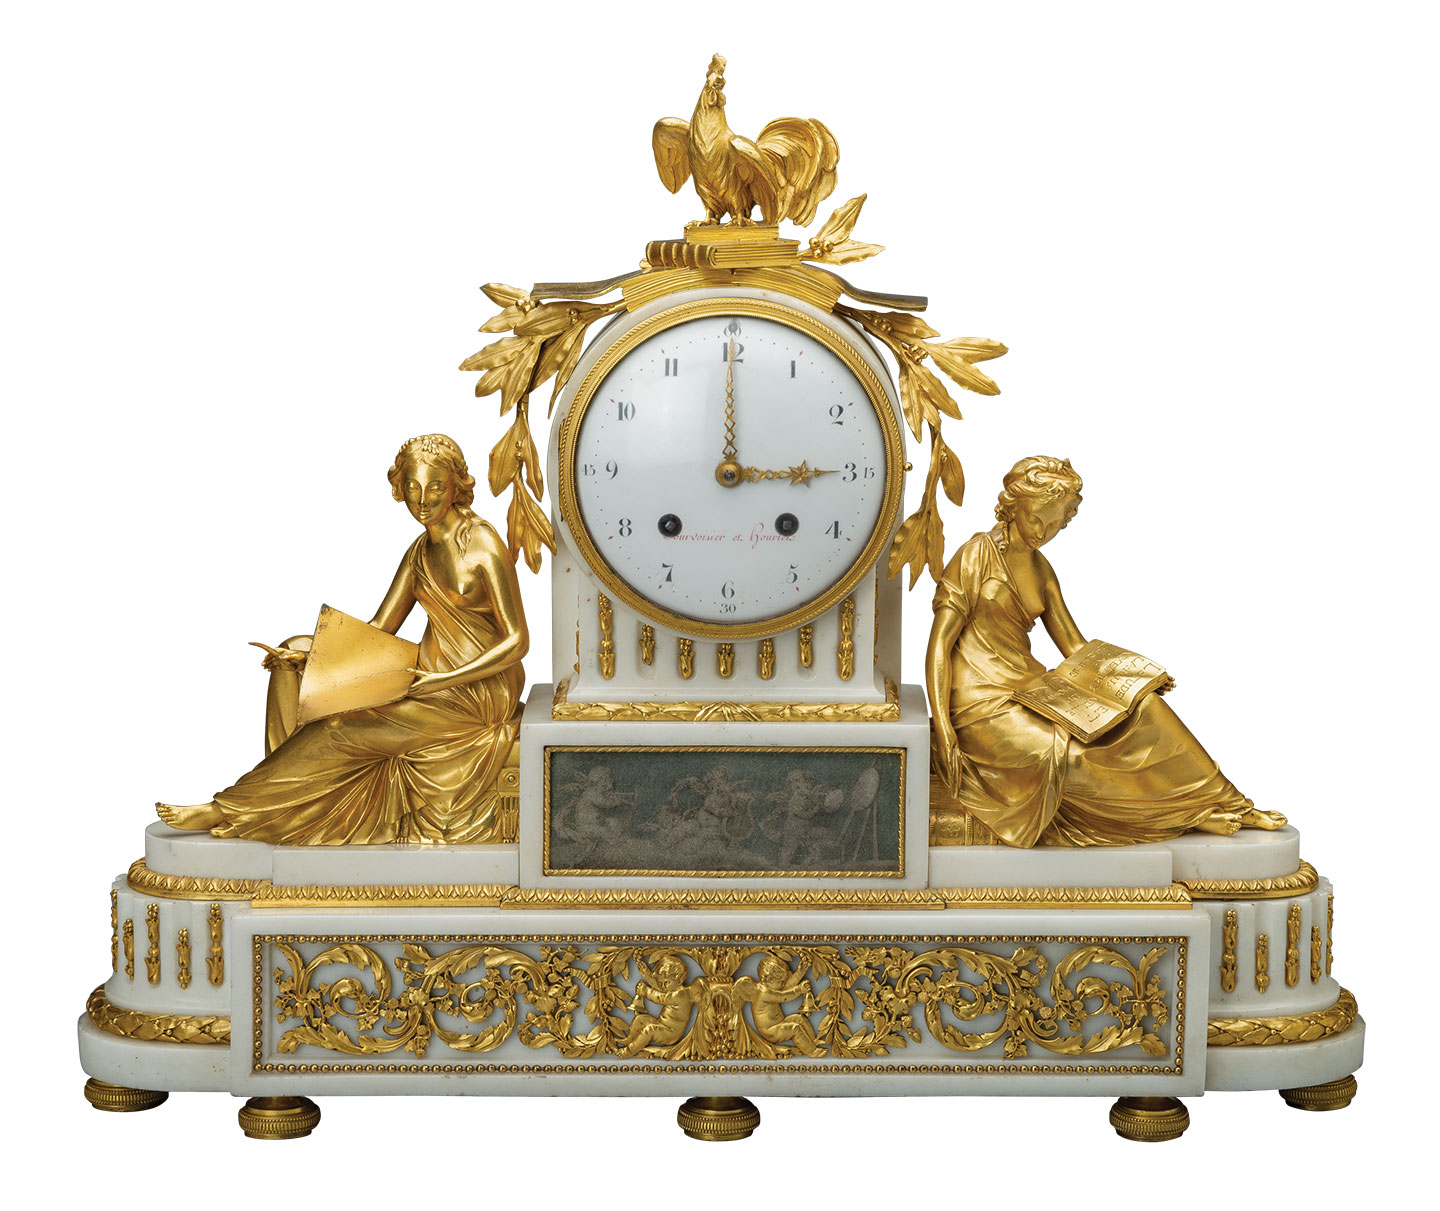 David-Louis Courvoisier (Swiss, 1726–1789) and Jacques-Frédéric Houriet (Swiss, 1743–1830), clockmakers, Mantel Clock, Paris, France, and Le Locle, Switzerland, about 1785, marble and gilded bronze with glass, enamel, brass, and steel.